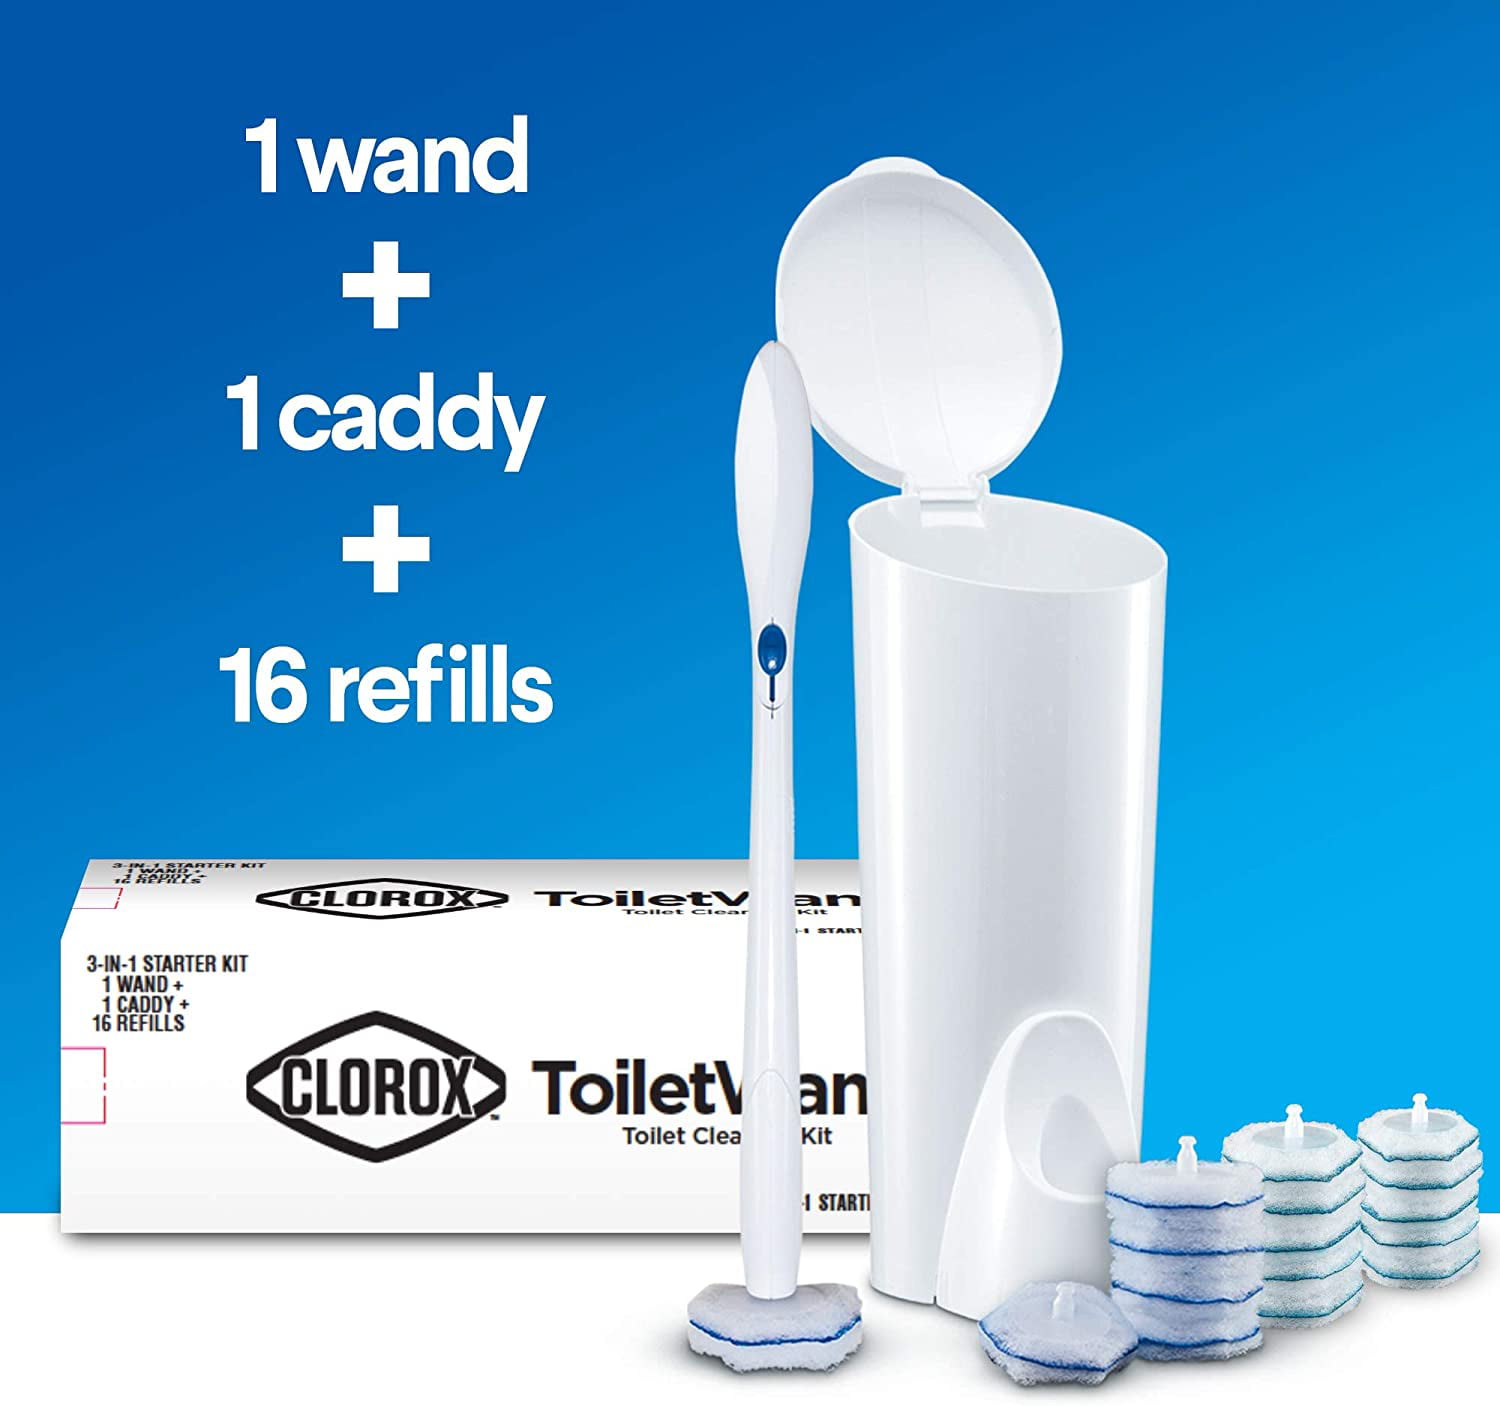 Disinfecting ToiletWand® Disposable Toilet Cleaning System